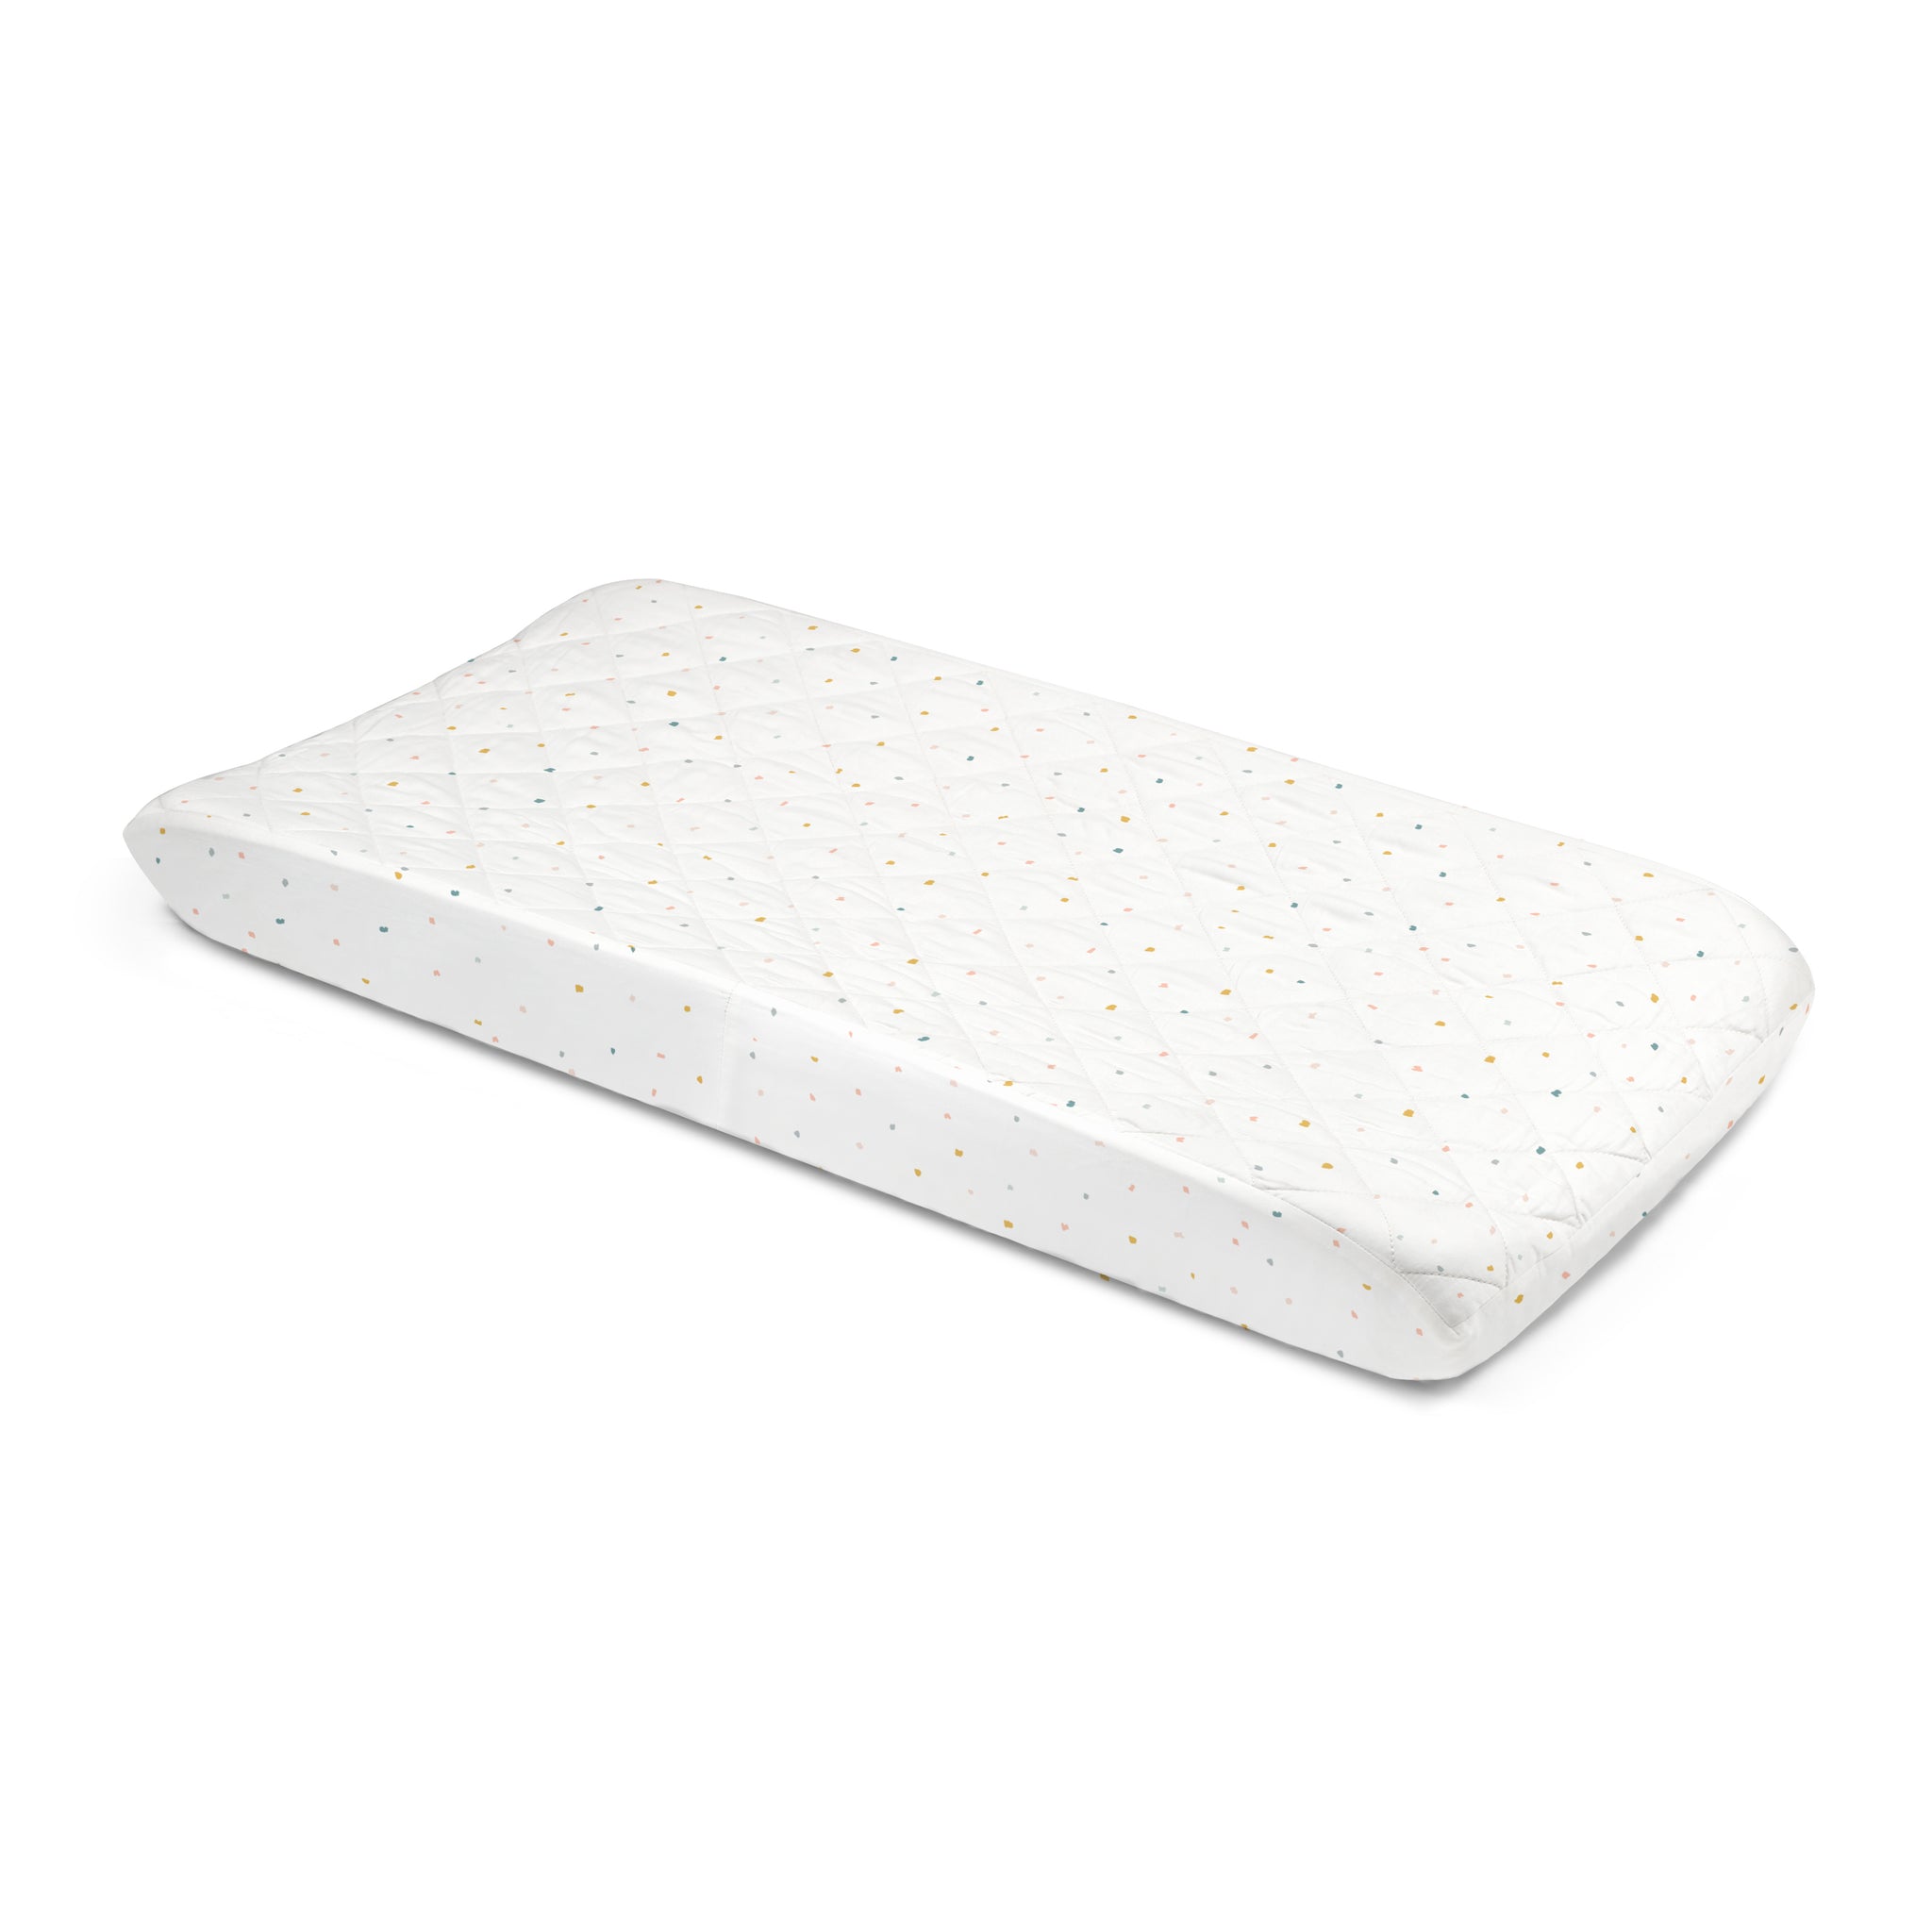 Organic Cotton Changing Pad Cover - Dotty